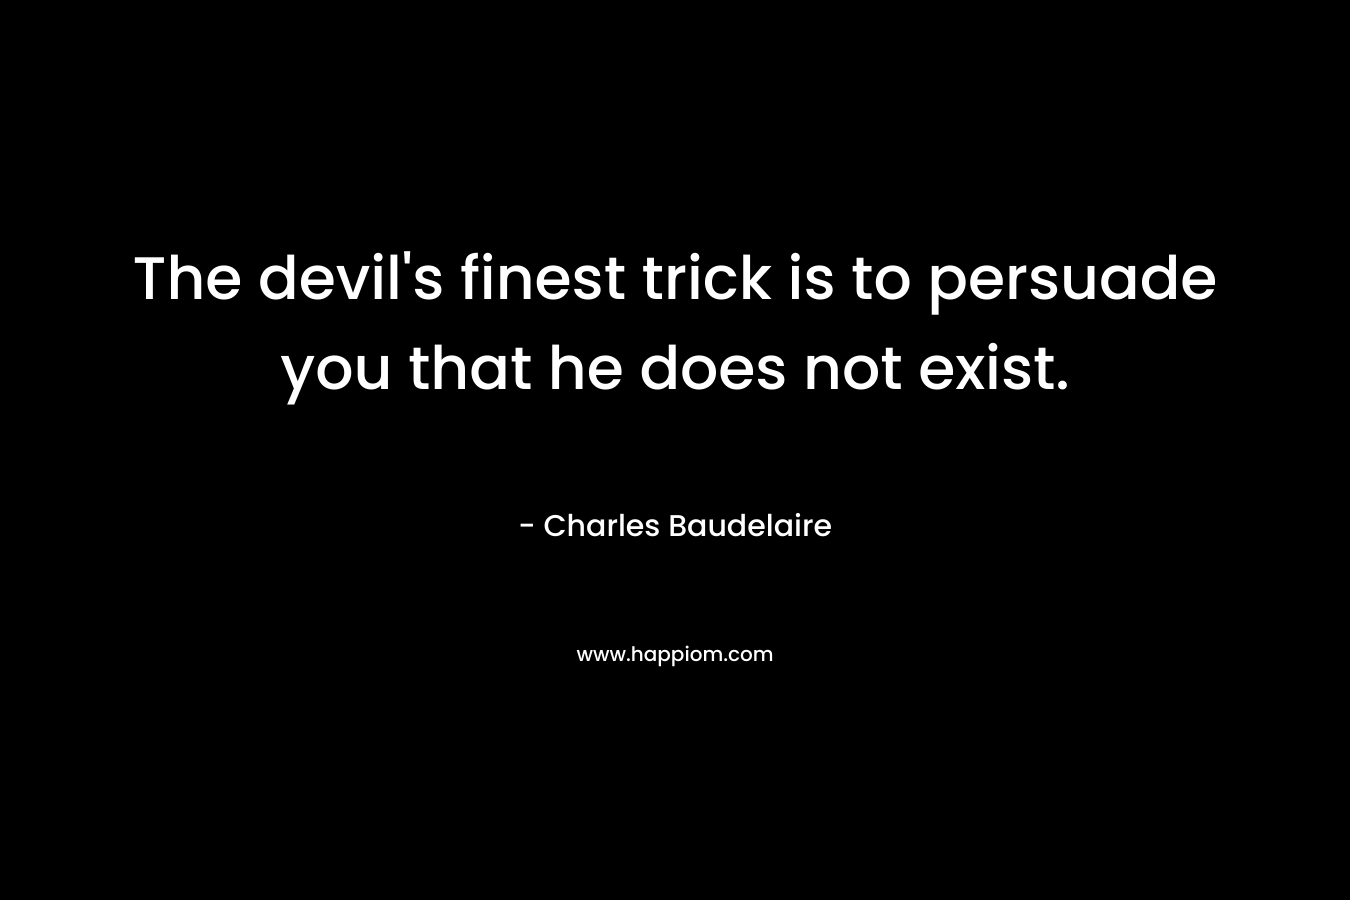 The devil's finest trick is to persuade you that he does not exist.